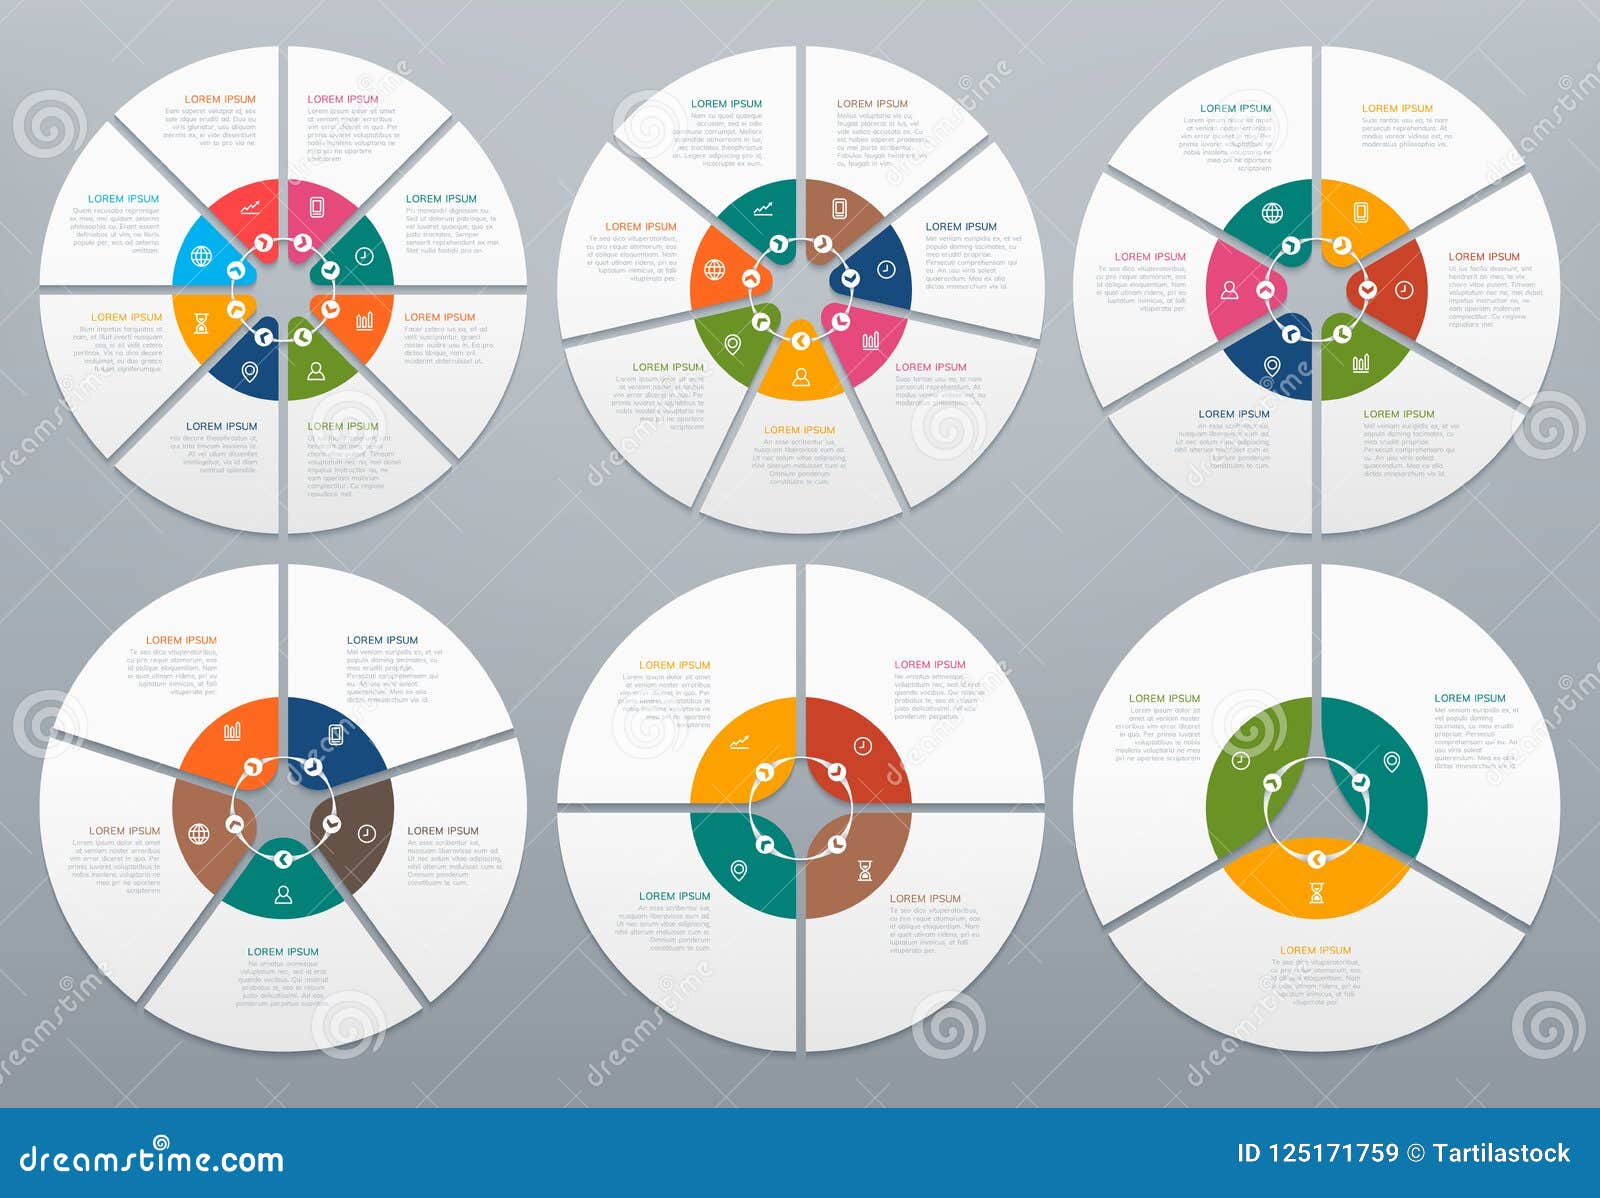 Circle Infographic Round Diagram Of Process Steps Circular Chart With